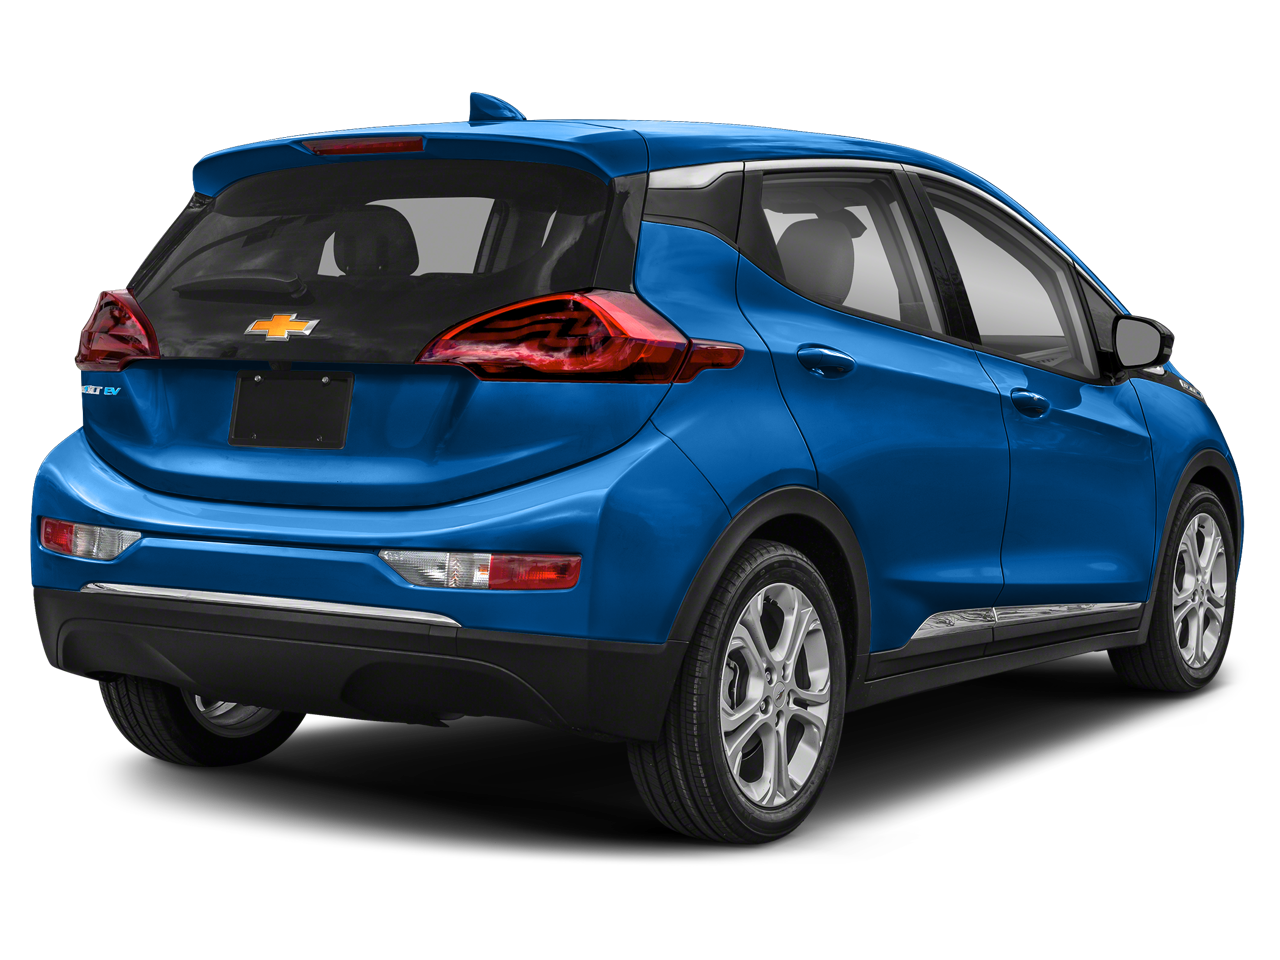 Used 2020 Chevrolet Bolt EV LT with VIN 1G1FY6S0XL4130439 for sale in Greenville, OH